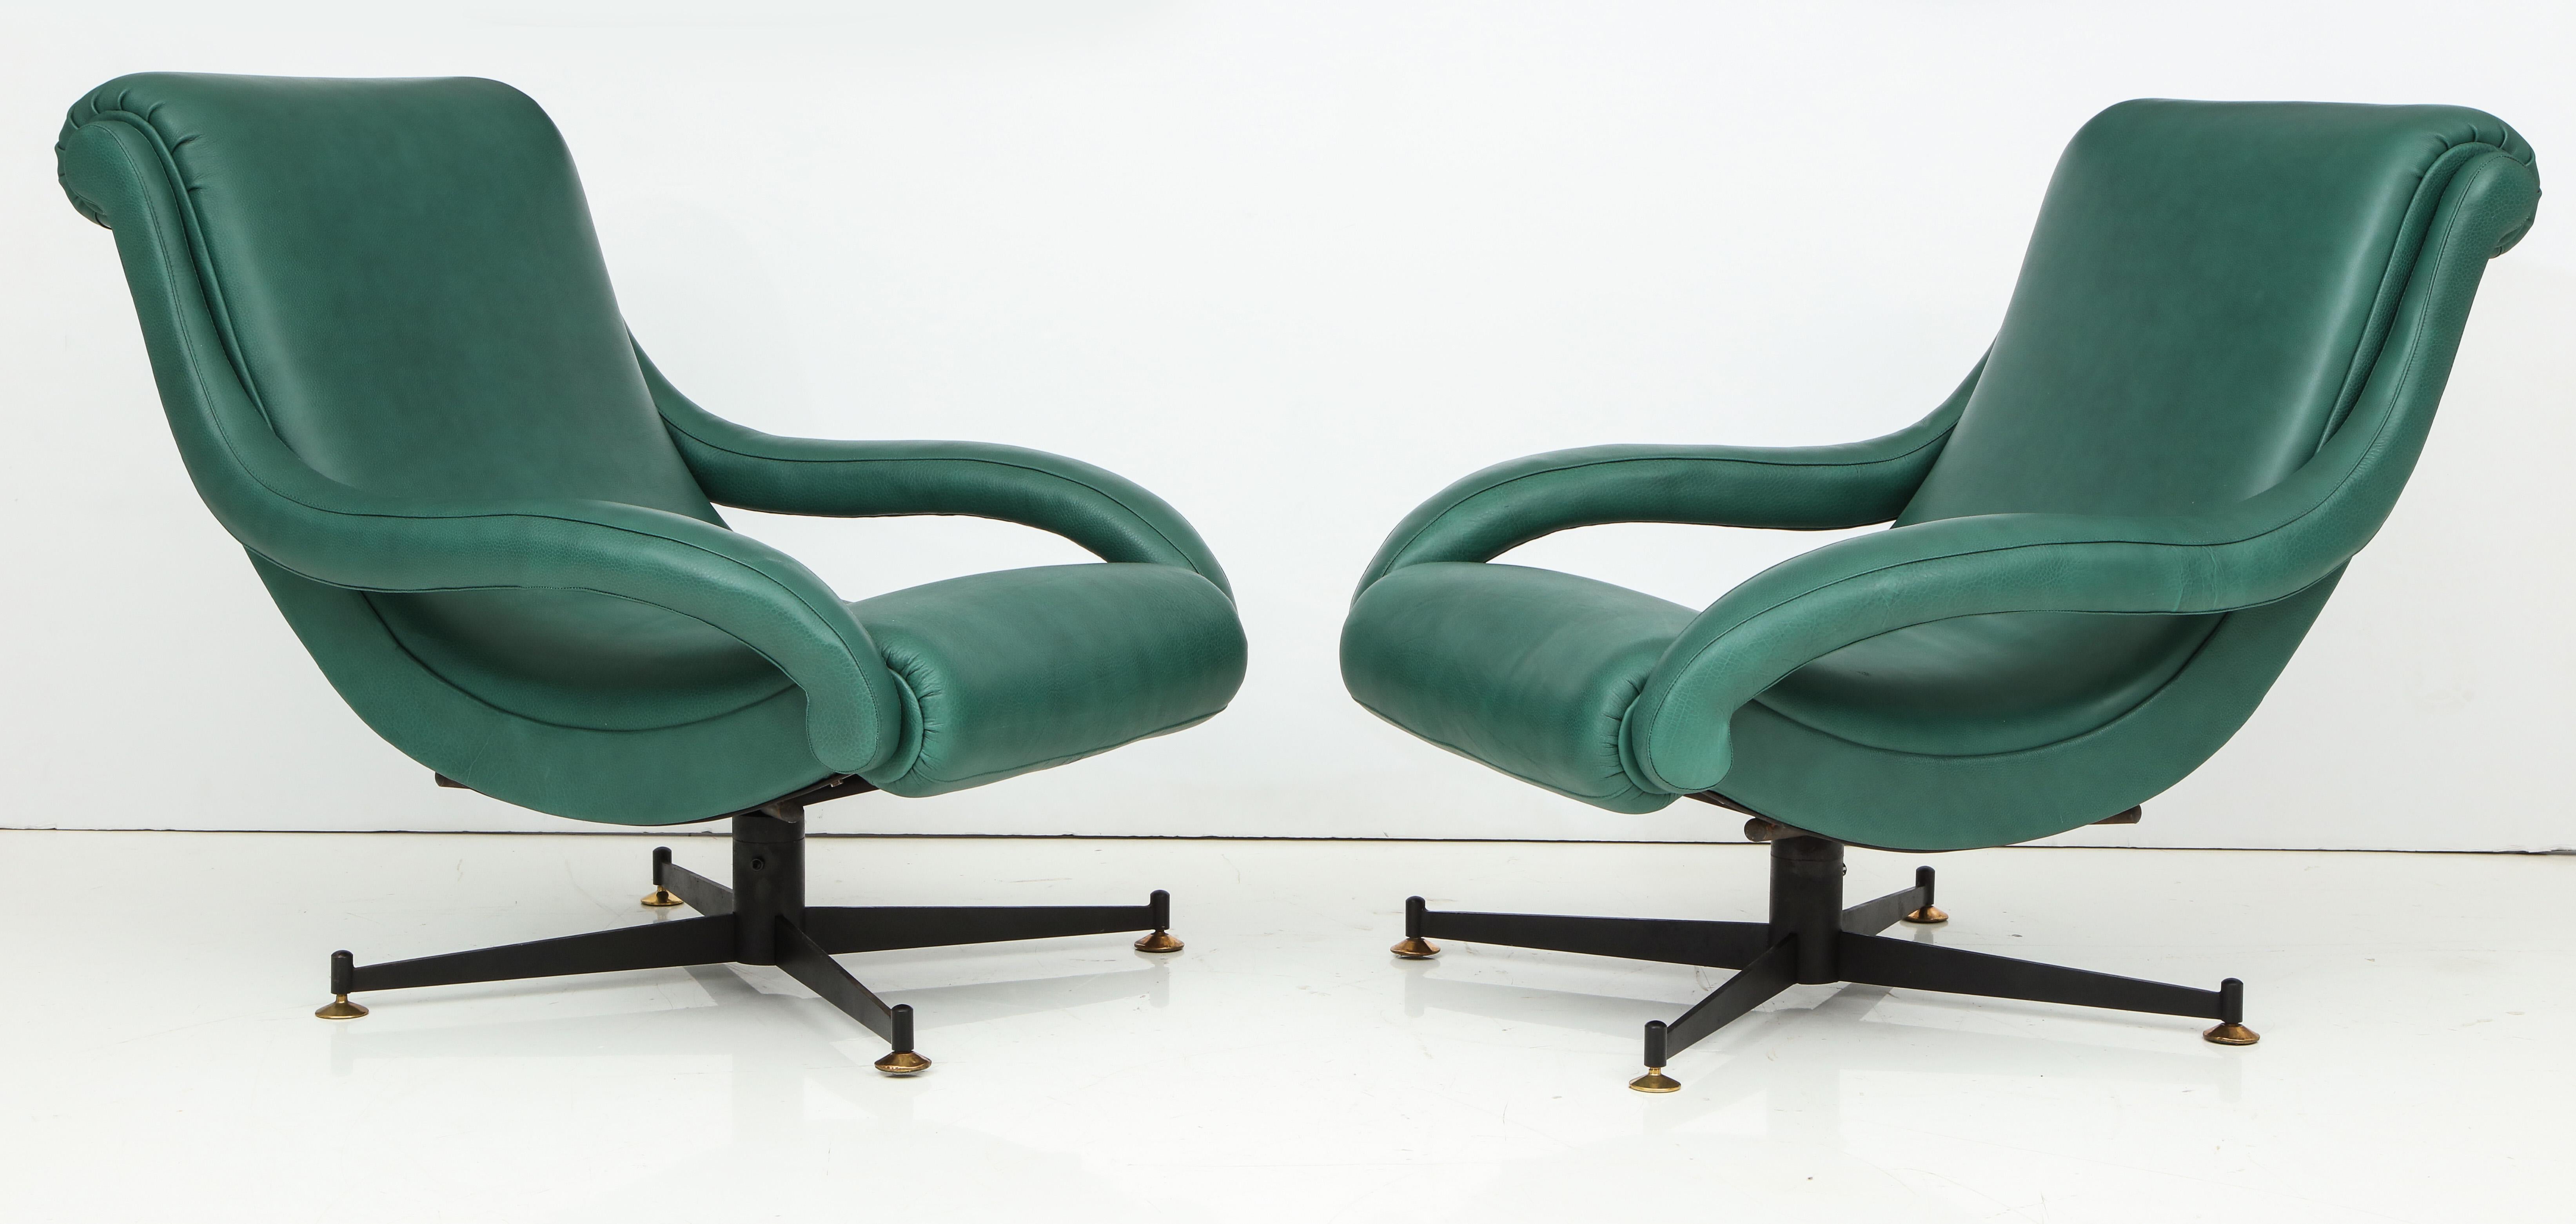 Pair of Lounge Chairs in Gucci Green Leather by Radice for Lenzi, c. 1950, Italy 6